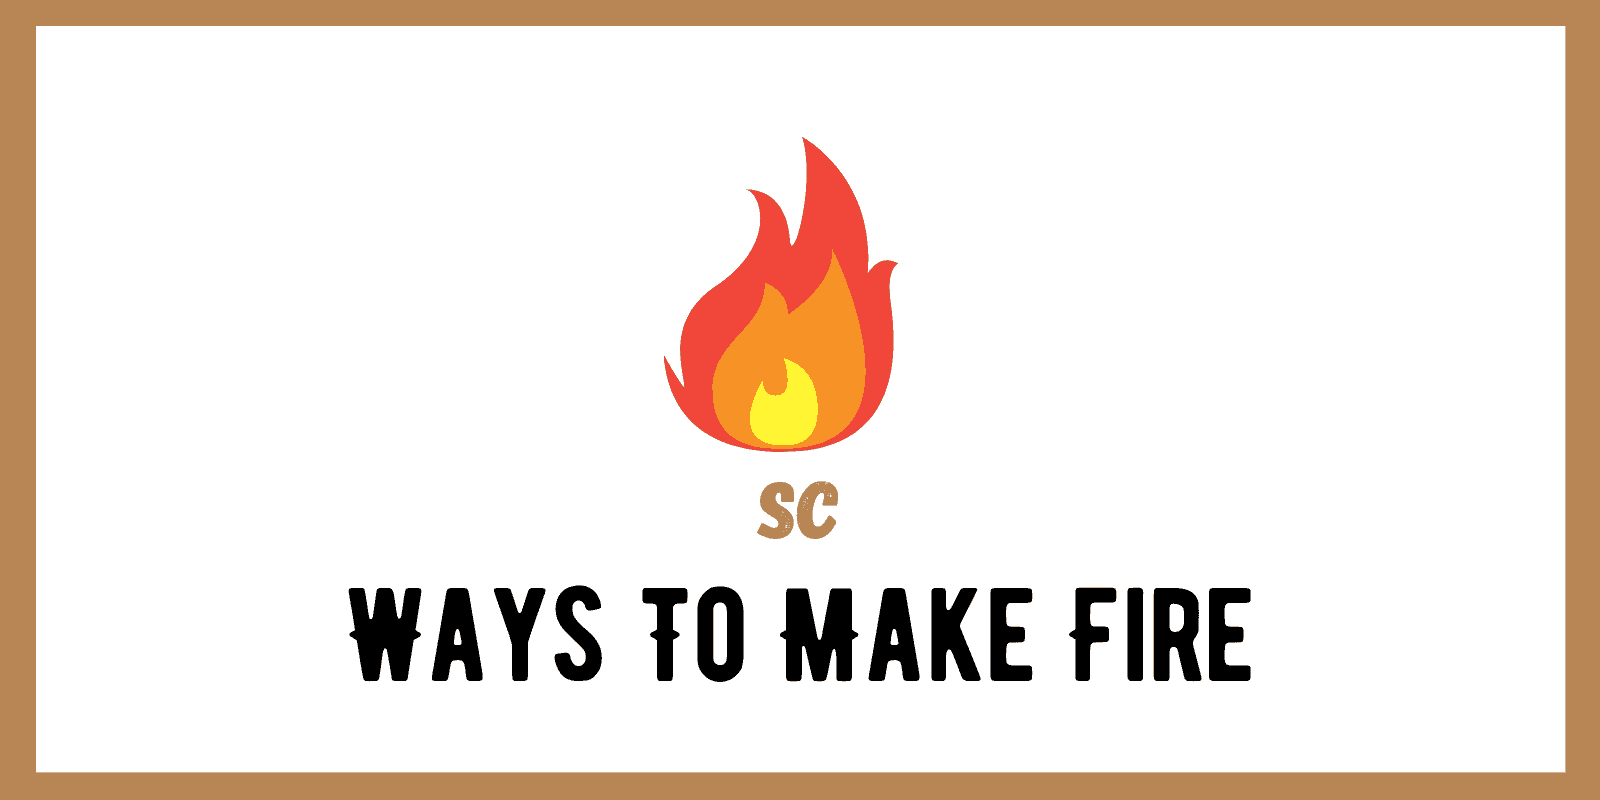 Best Fire Starters for Survival in 2022: Reviews, and Ways to Make Fire